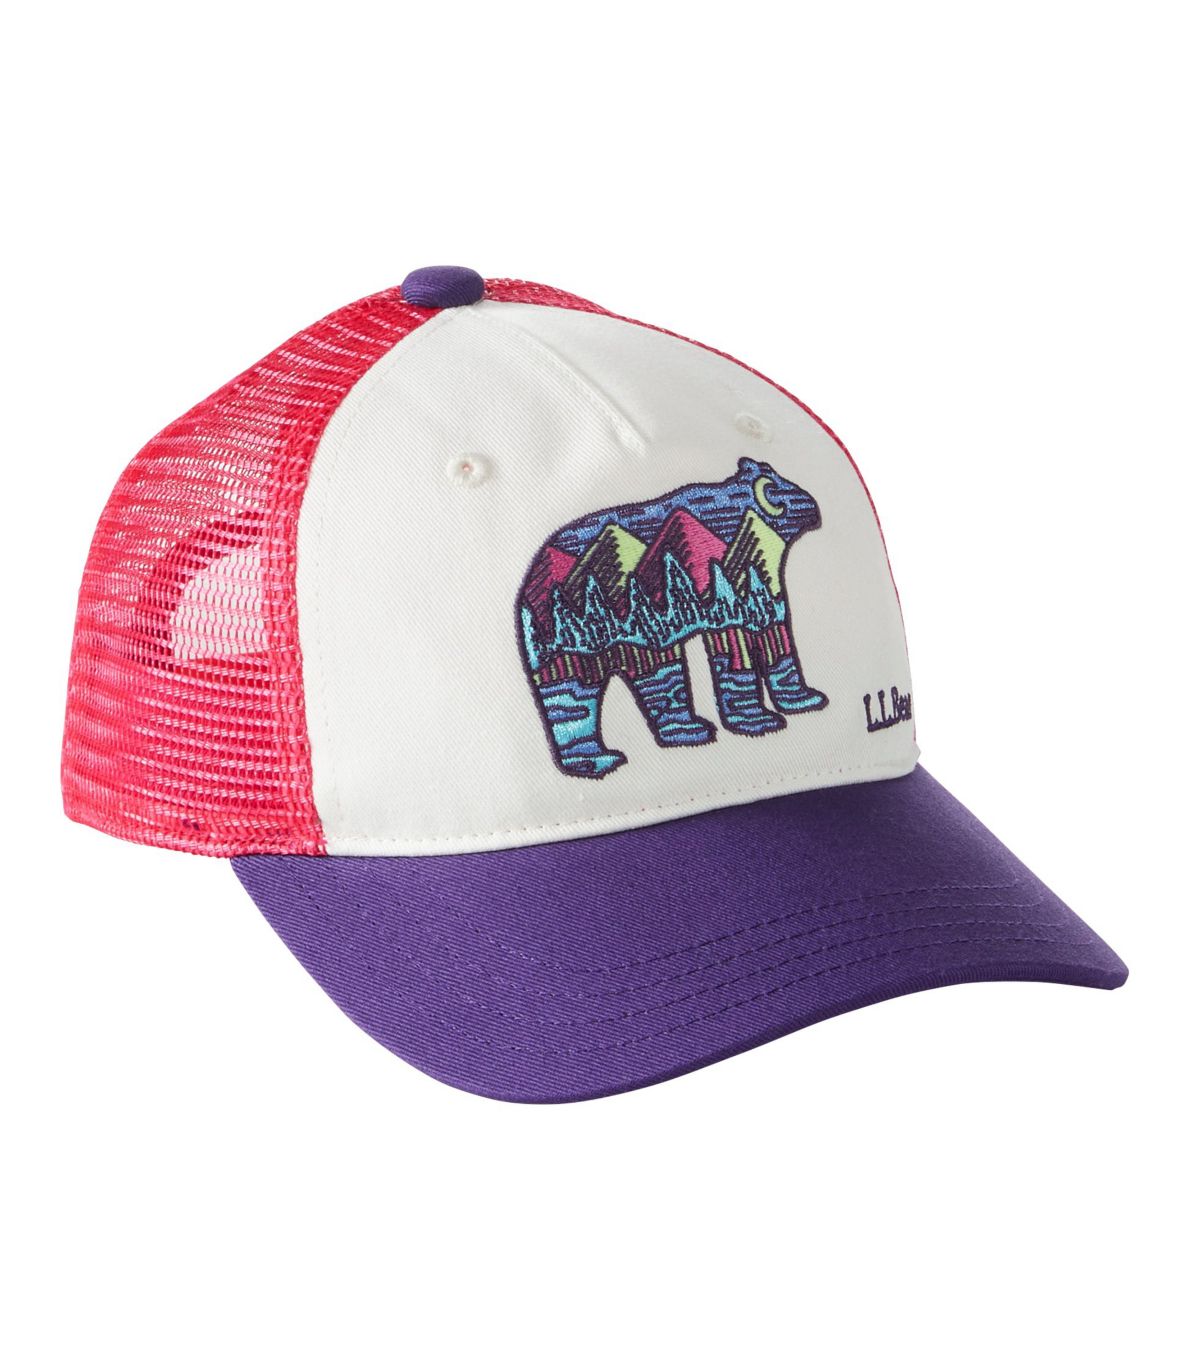 Toddlers' Trucker Hat